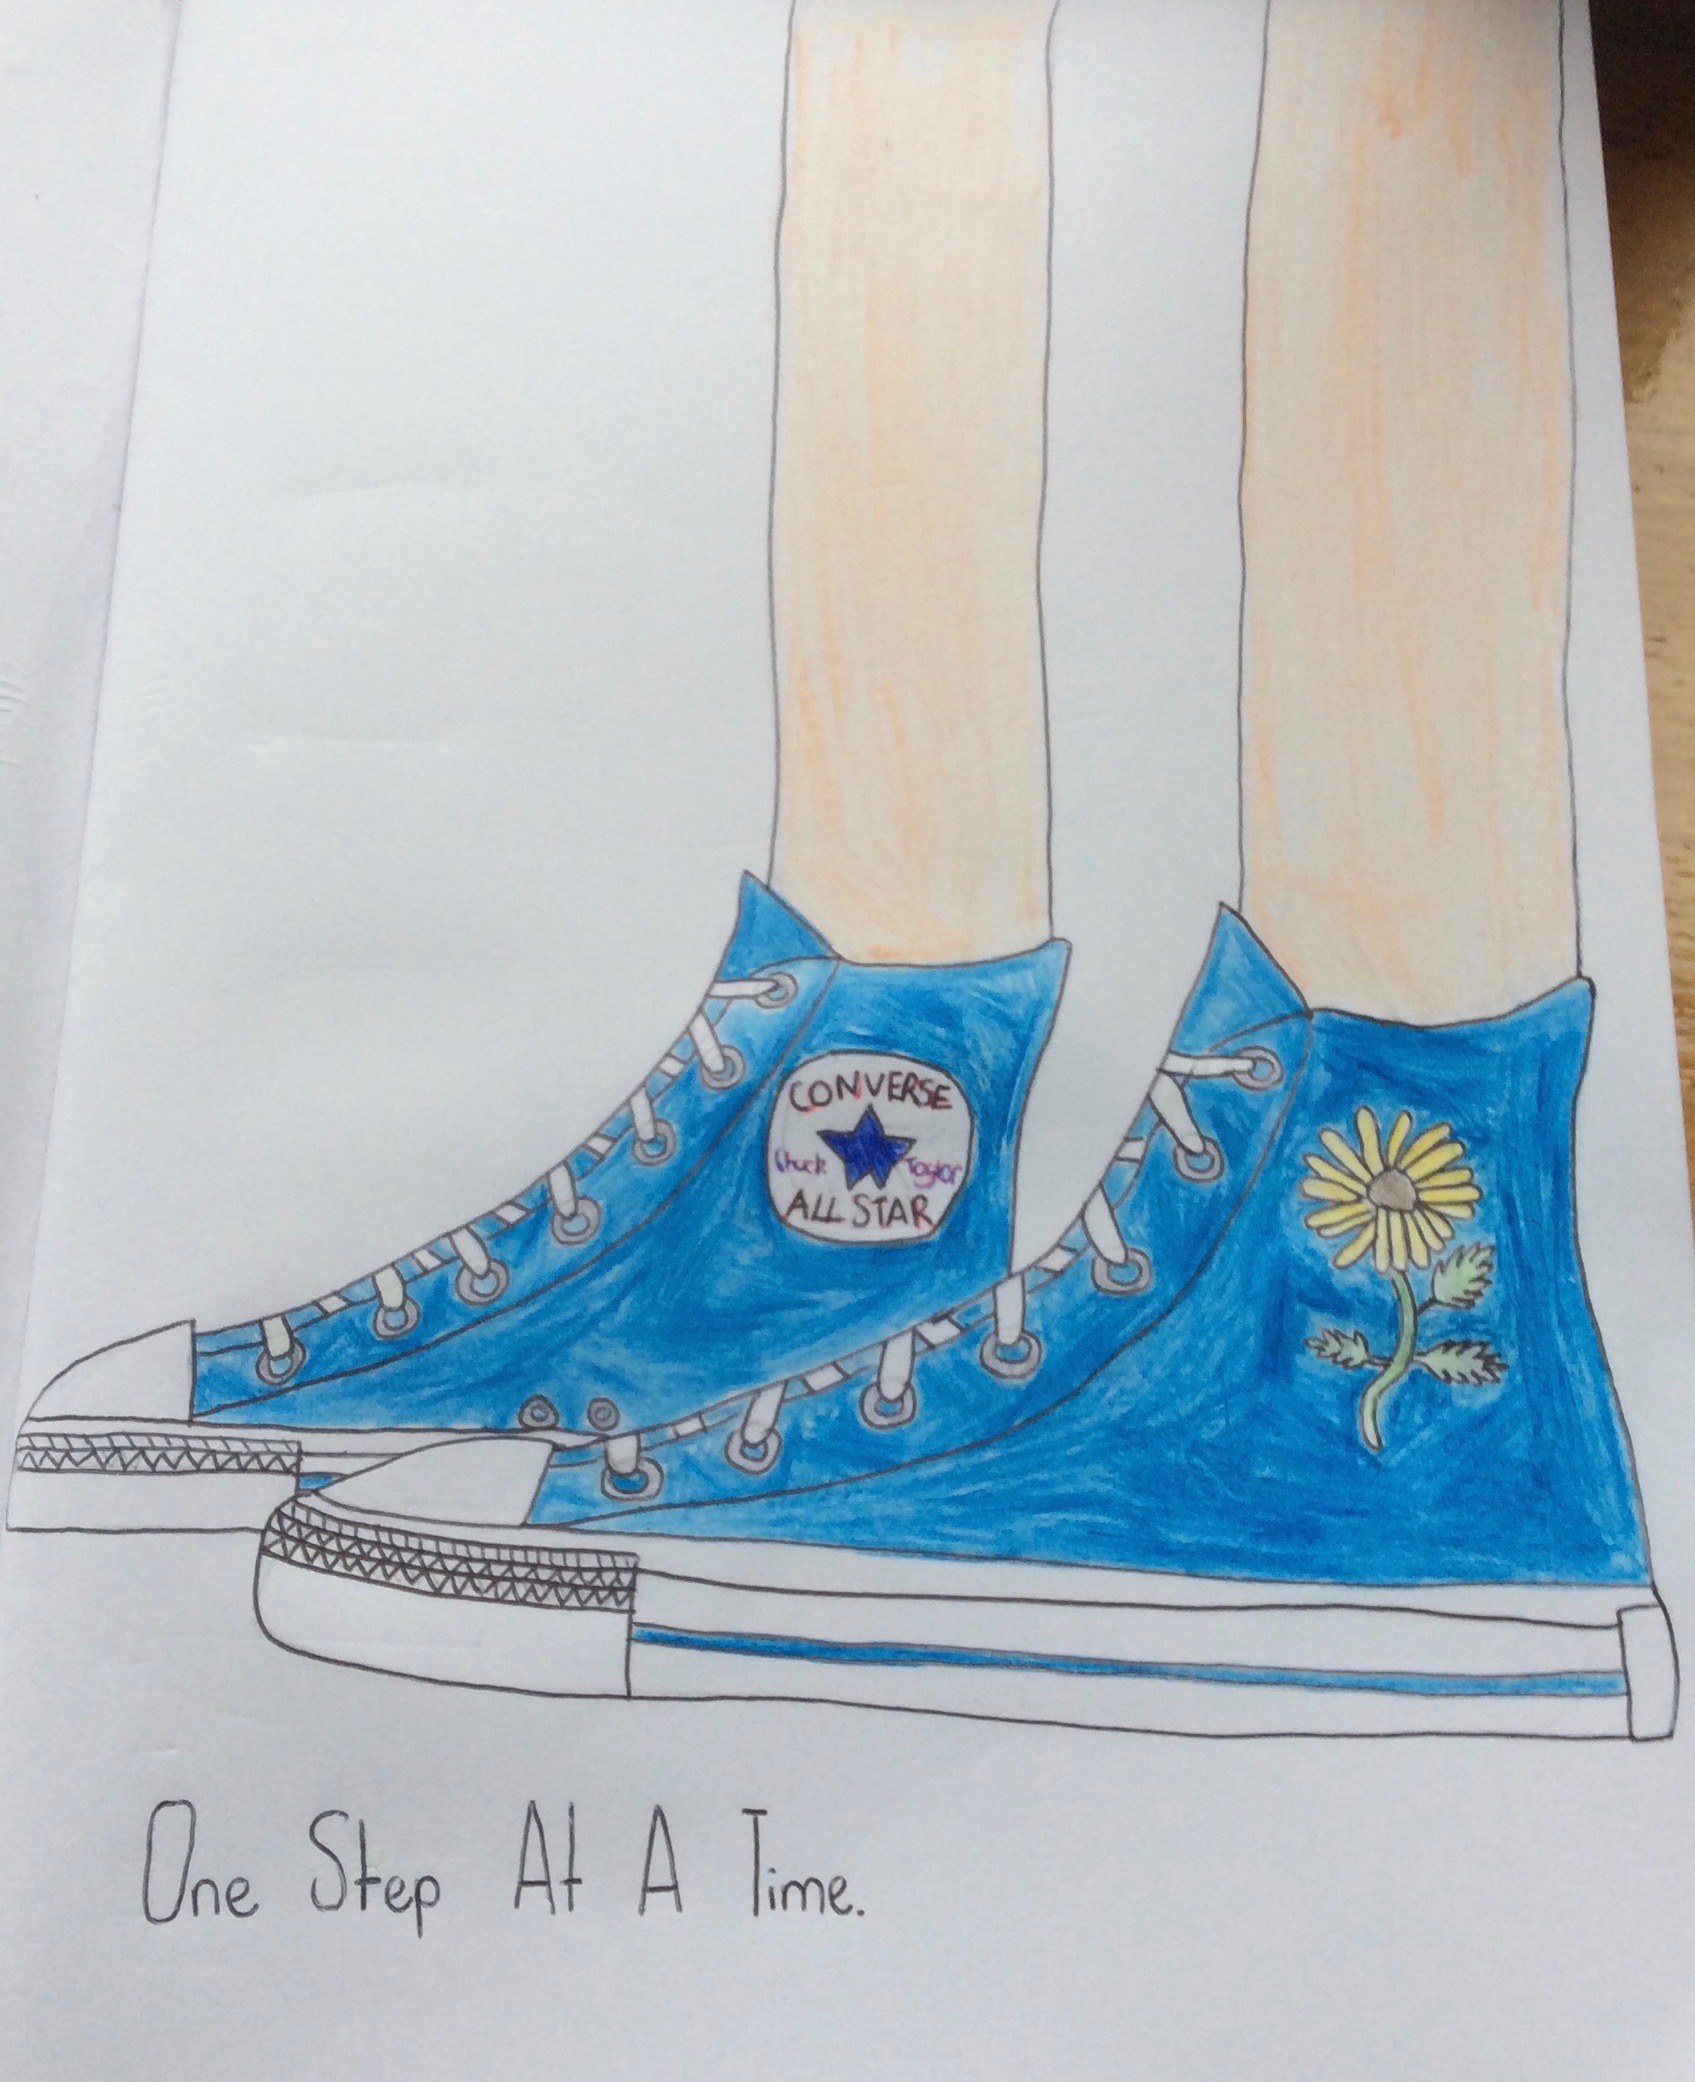 'One Step At A Time' by Aoibheann (11) from Cork